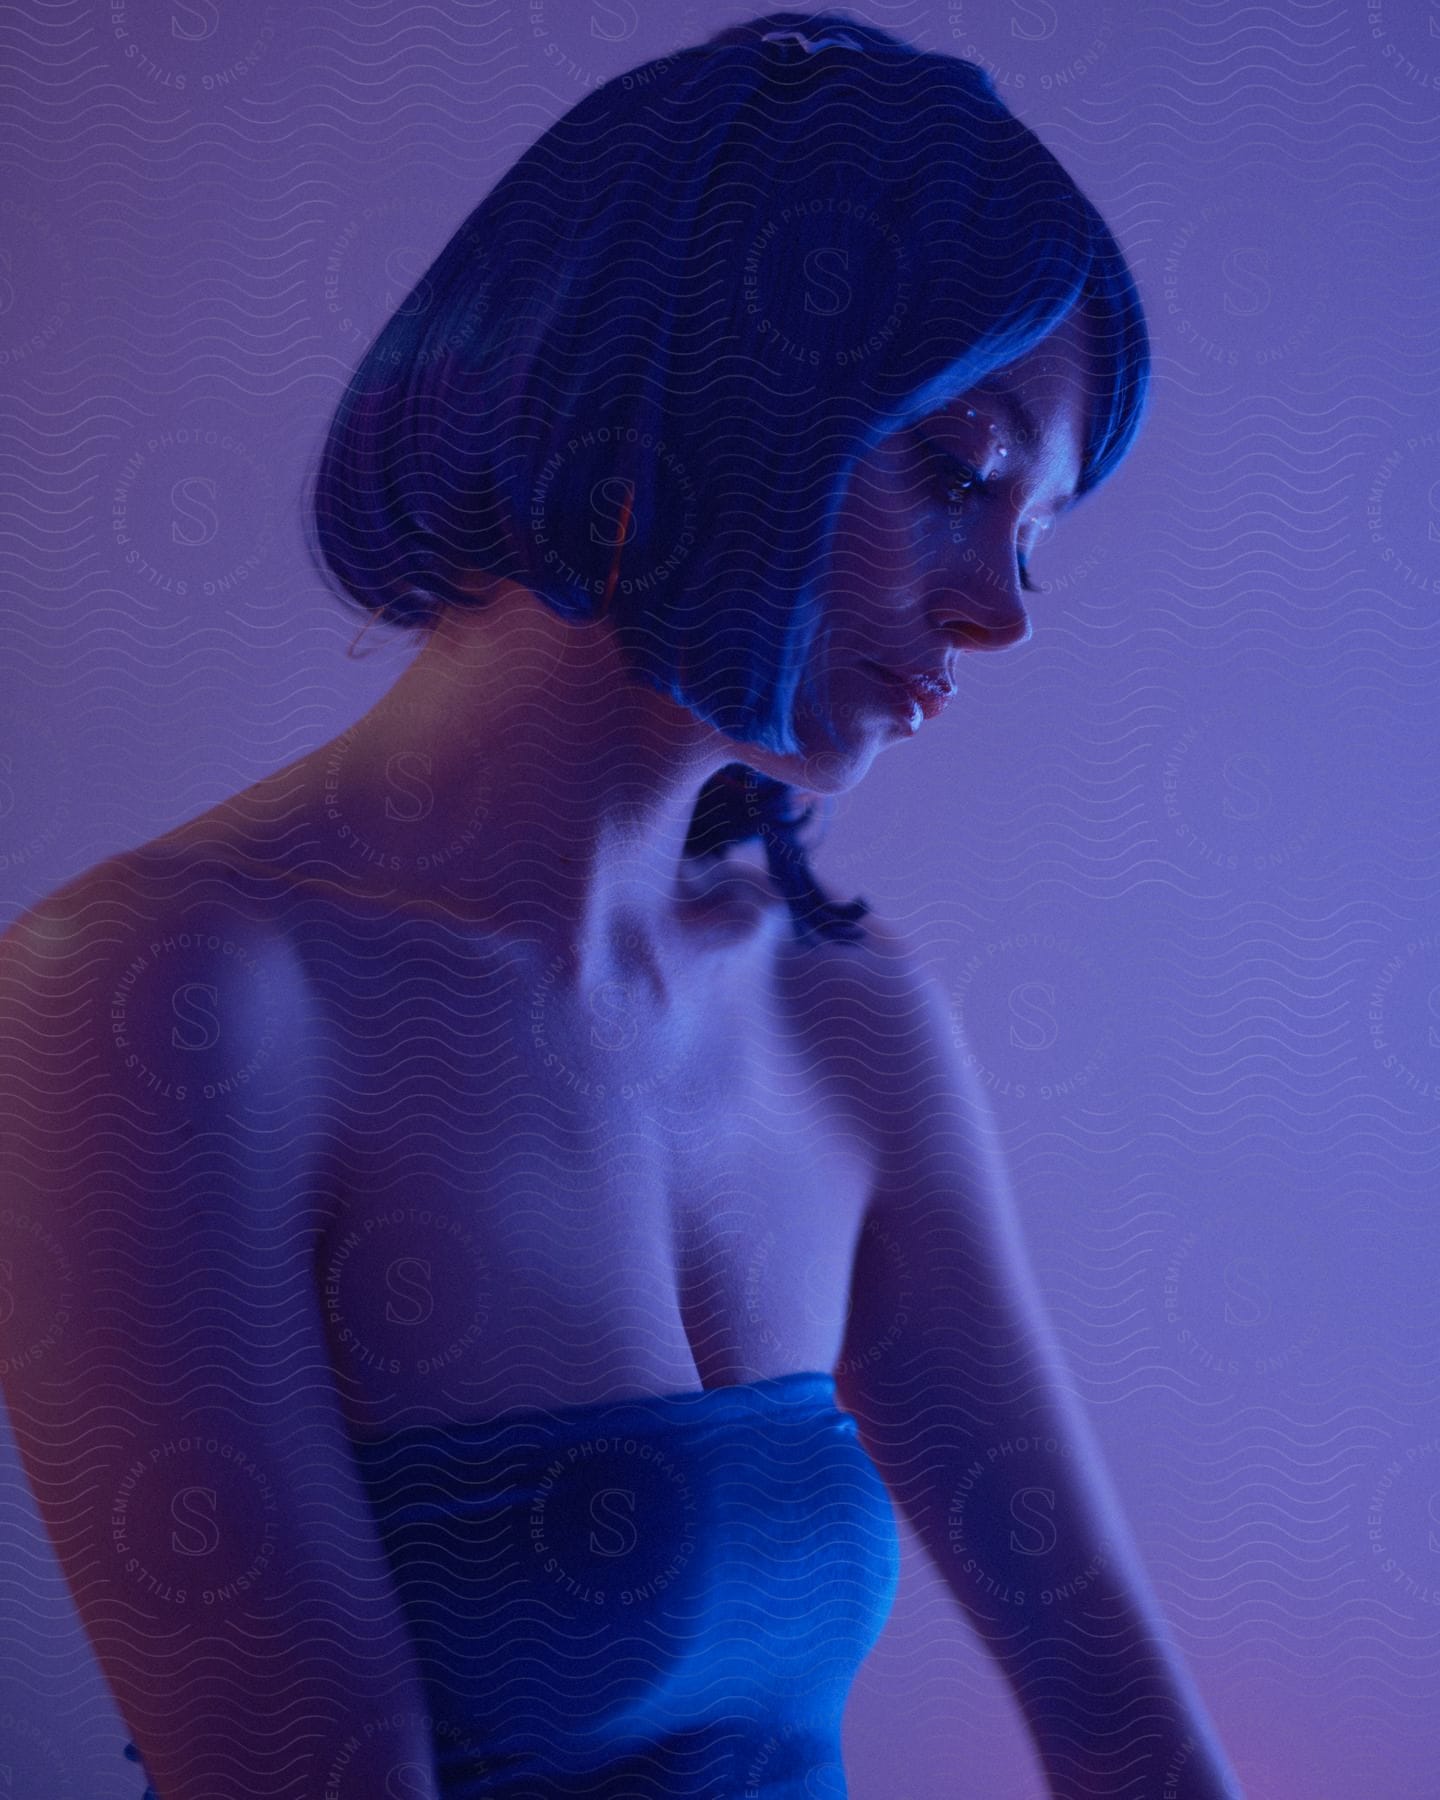 A blue haired woman in a blue tube top.